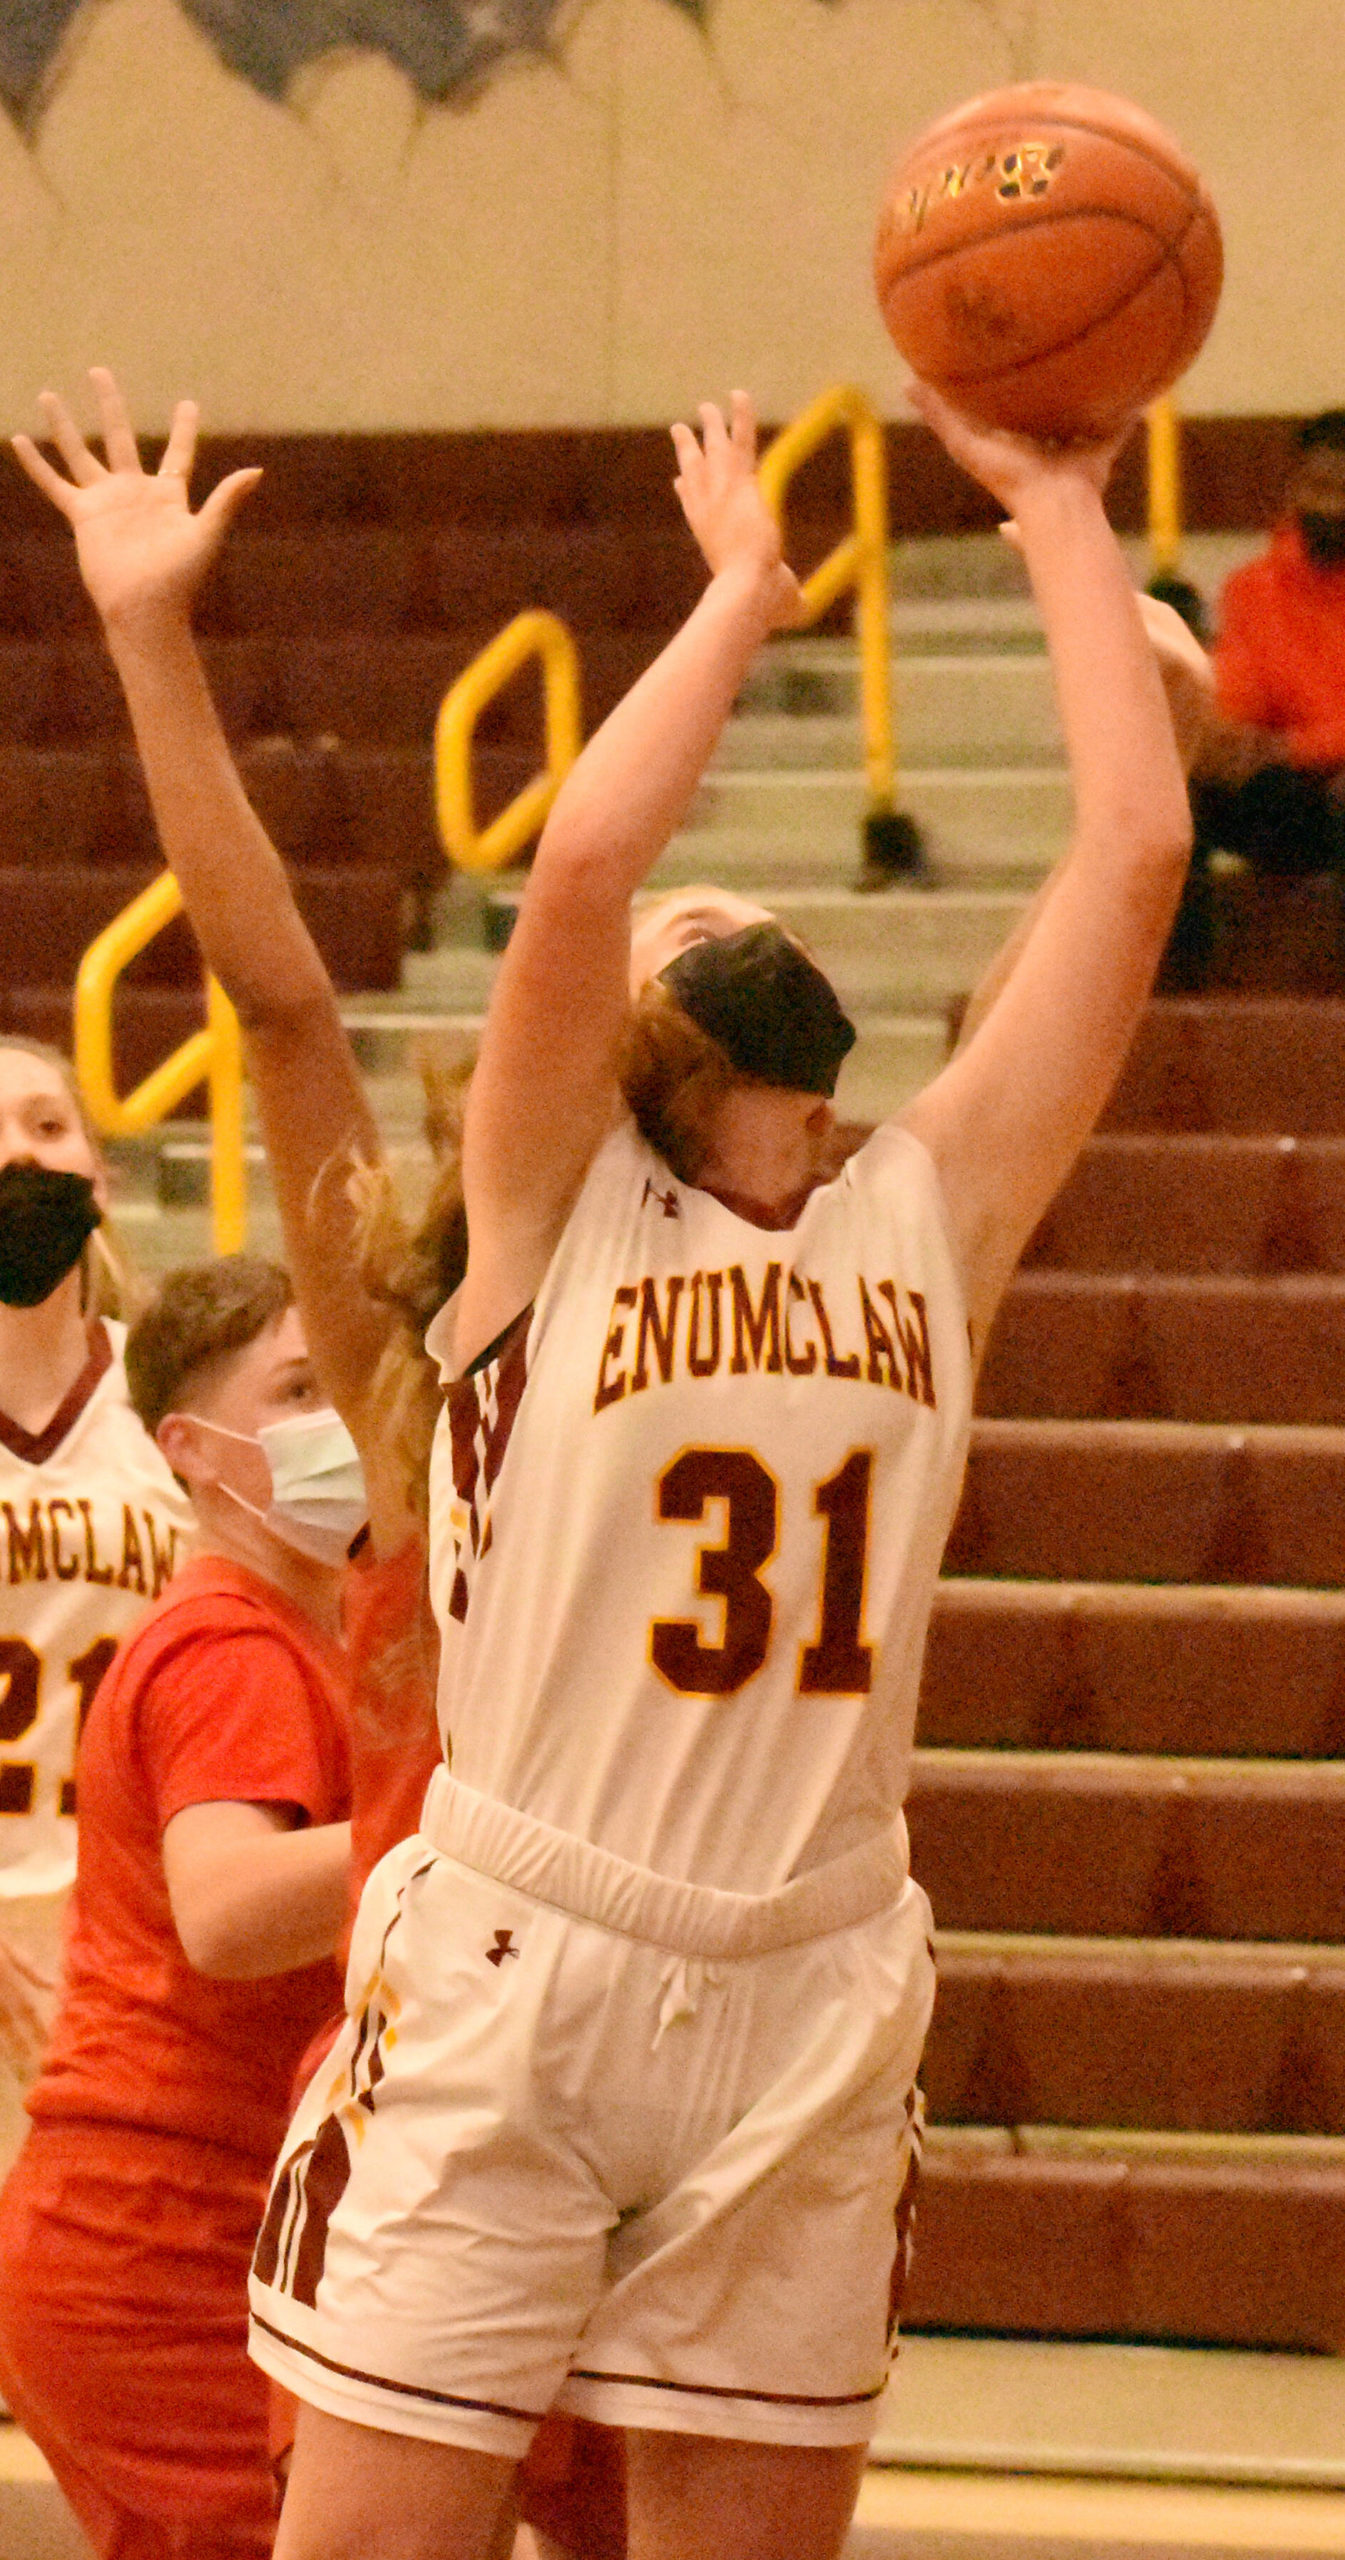 FILE PHOTO BY KEVIN HANSON
One of the Plateau's top returning players is Enumclaw High senior Rosie Penke who earned first team all-league  honors a season ago. Here, she goes up for  two points during a game last season.